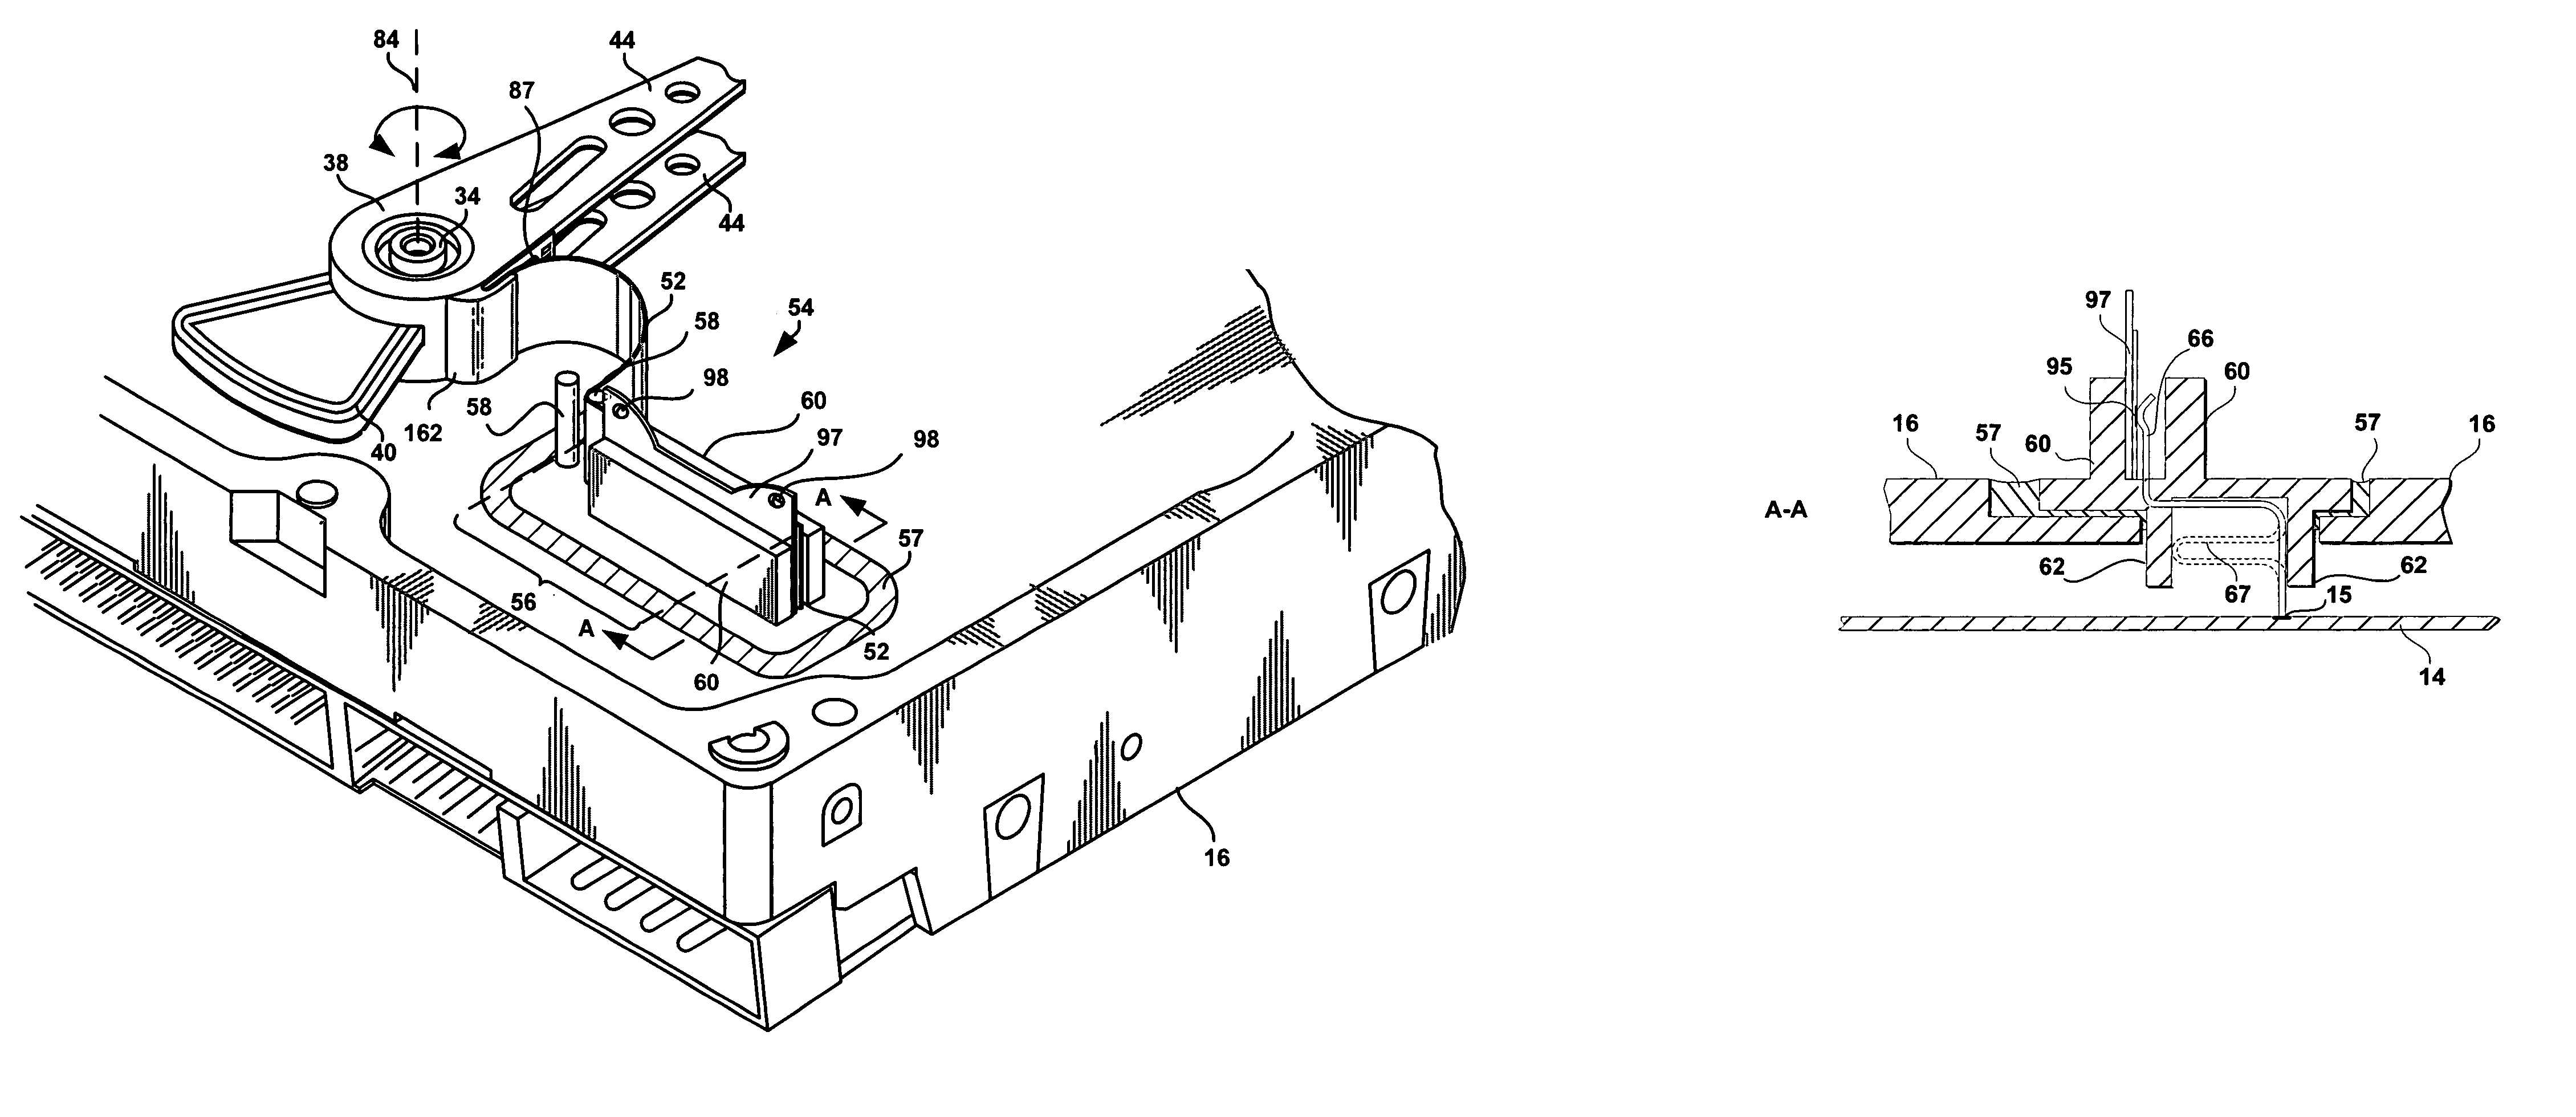 Disk drive including a base assembly having a flex-to-board edge connector